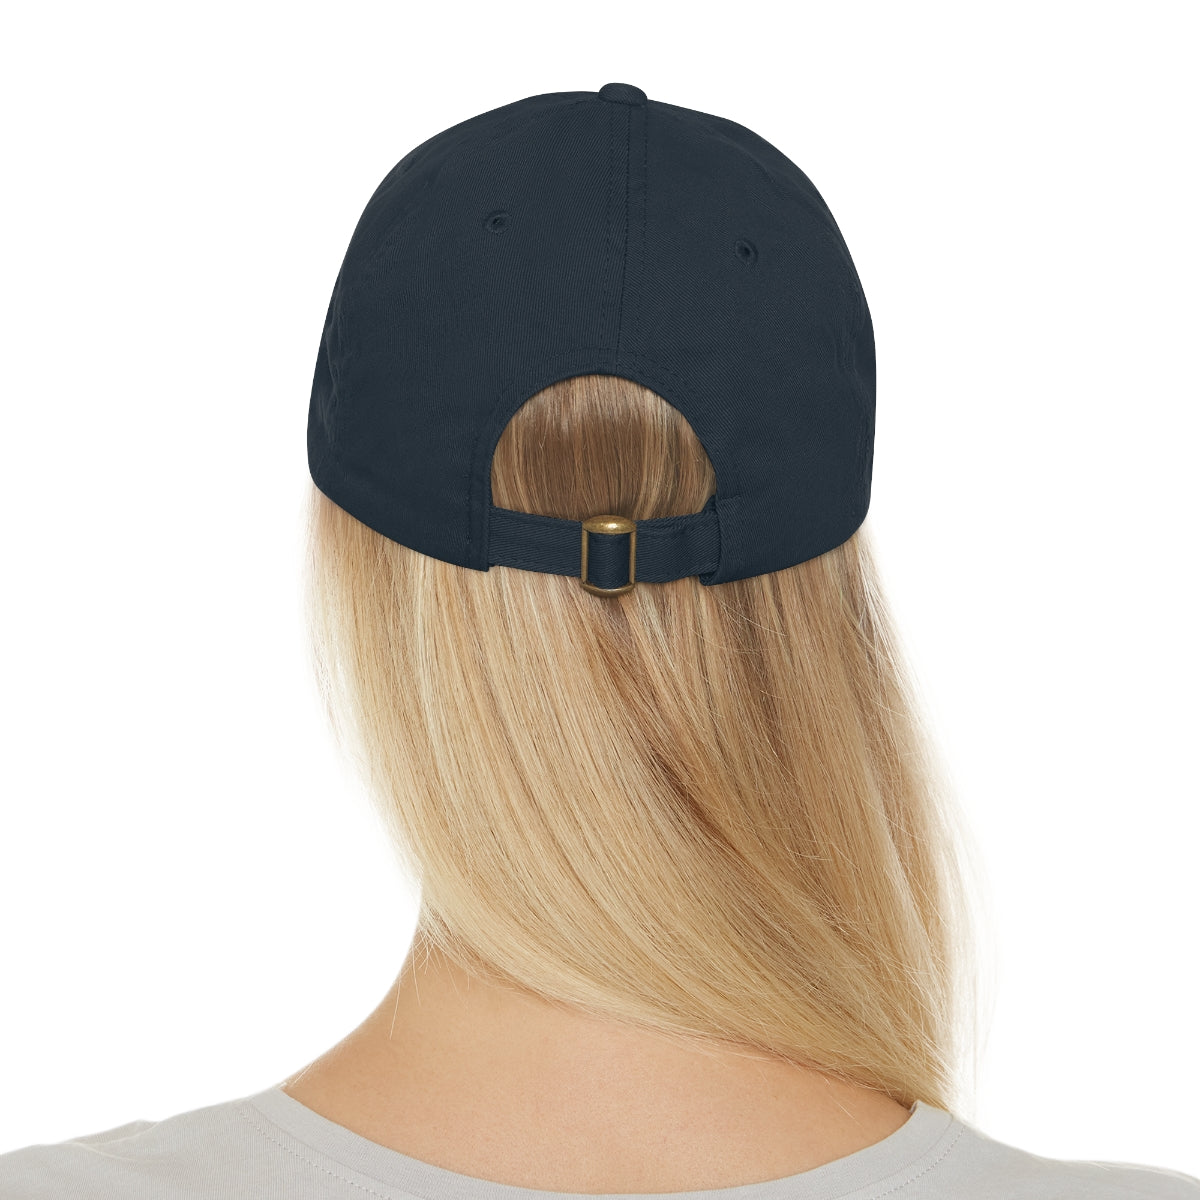 SBT 20 Hat with Leather Patch (Gold)